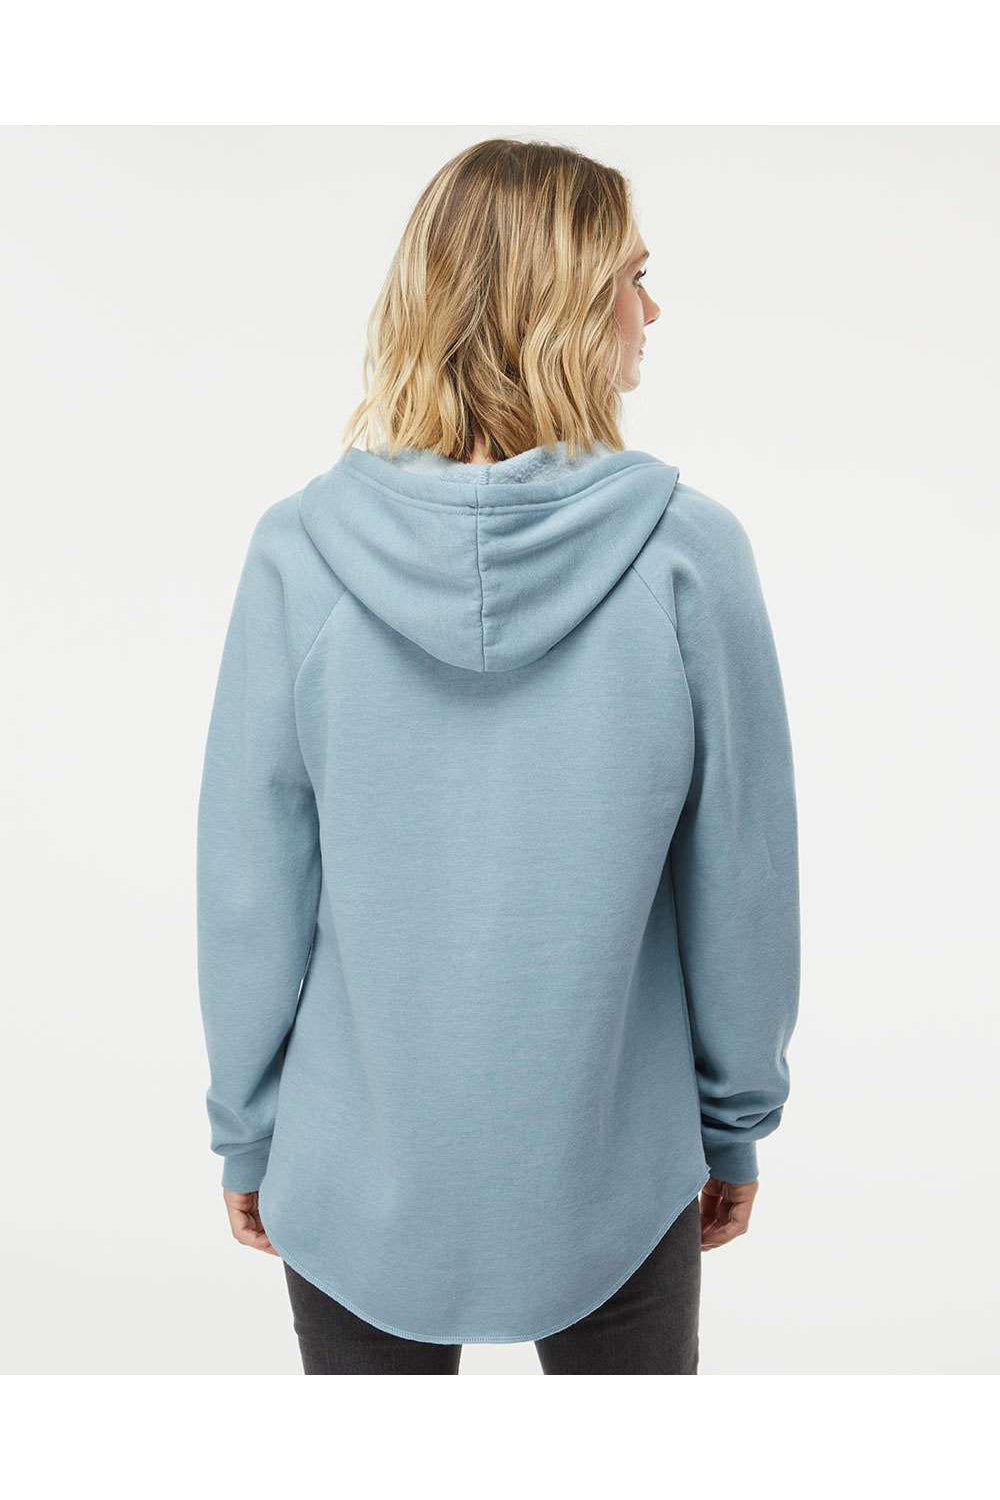 Independent Trading Co. PRM2500 Womens California Wave Wash Hooded Sweatshirt Hoodie Misty Blue Model Back